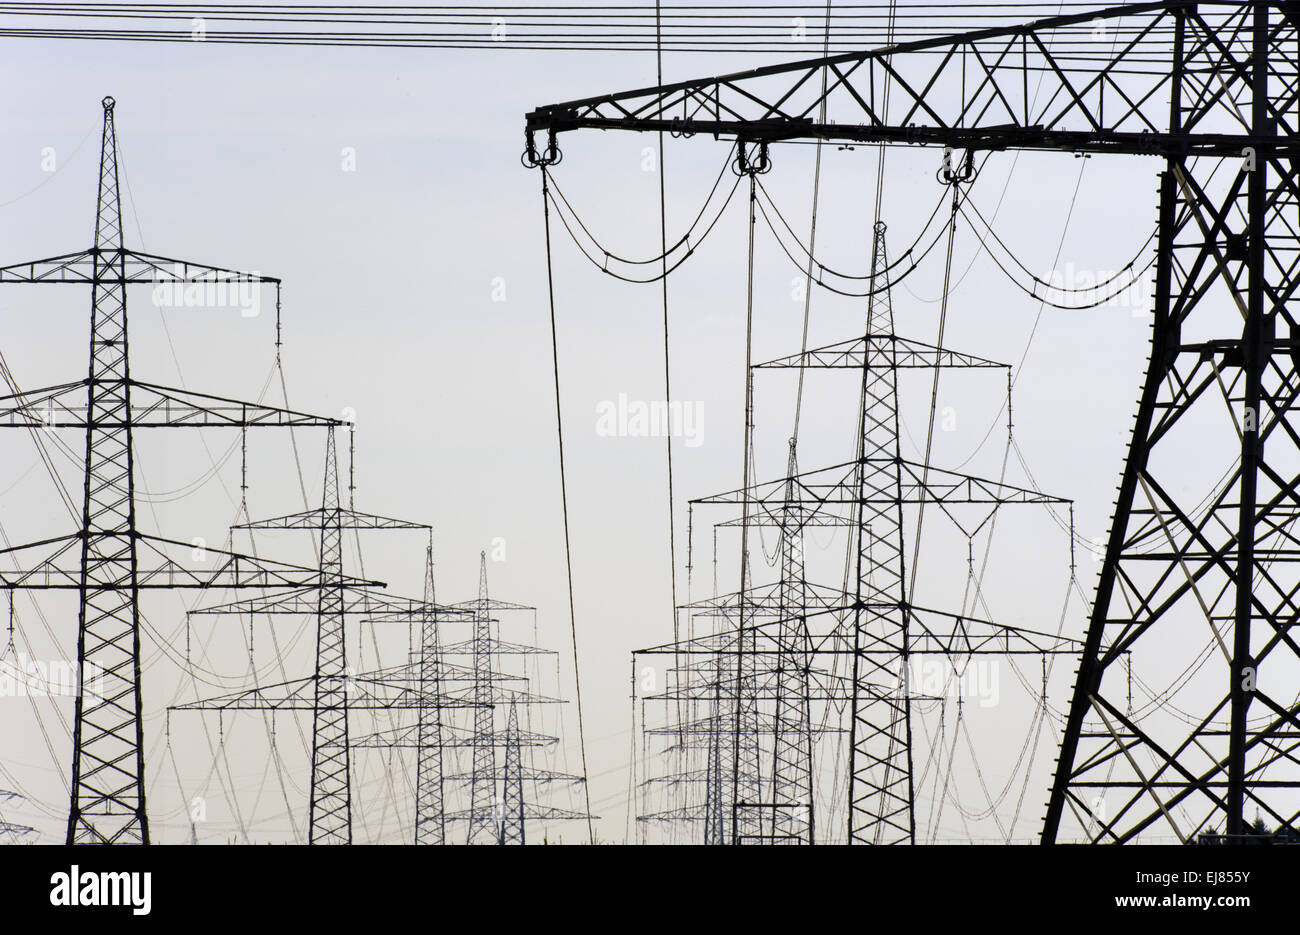 group of electric power poles Stock Photo